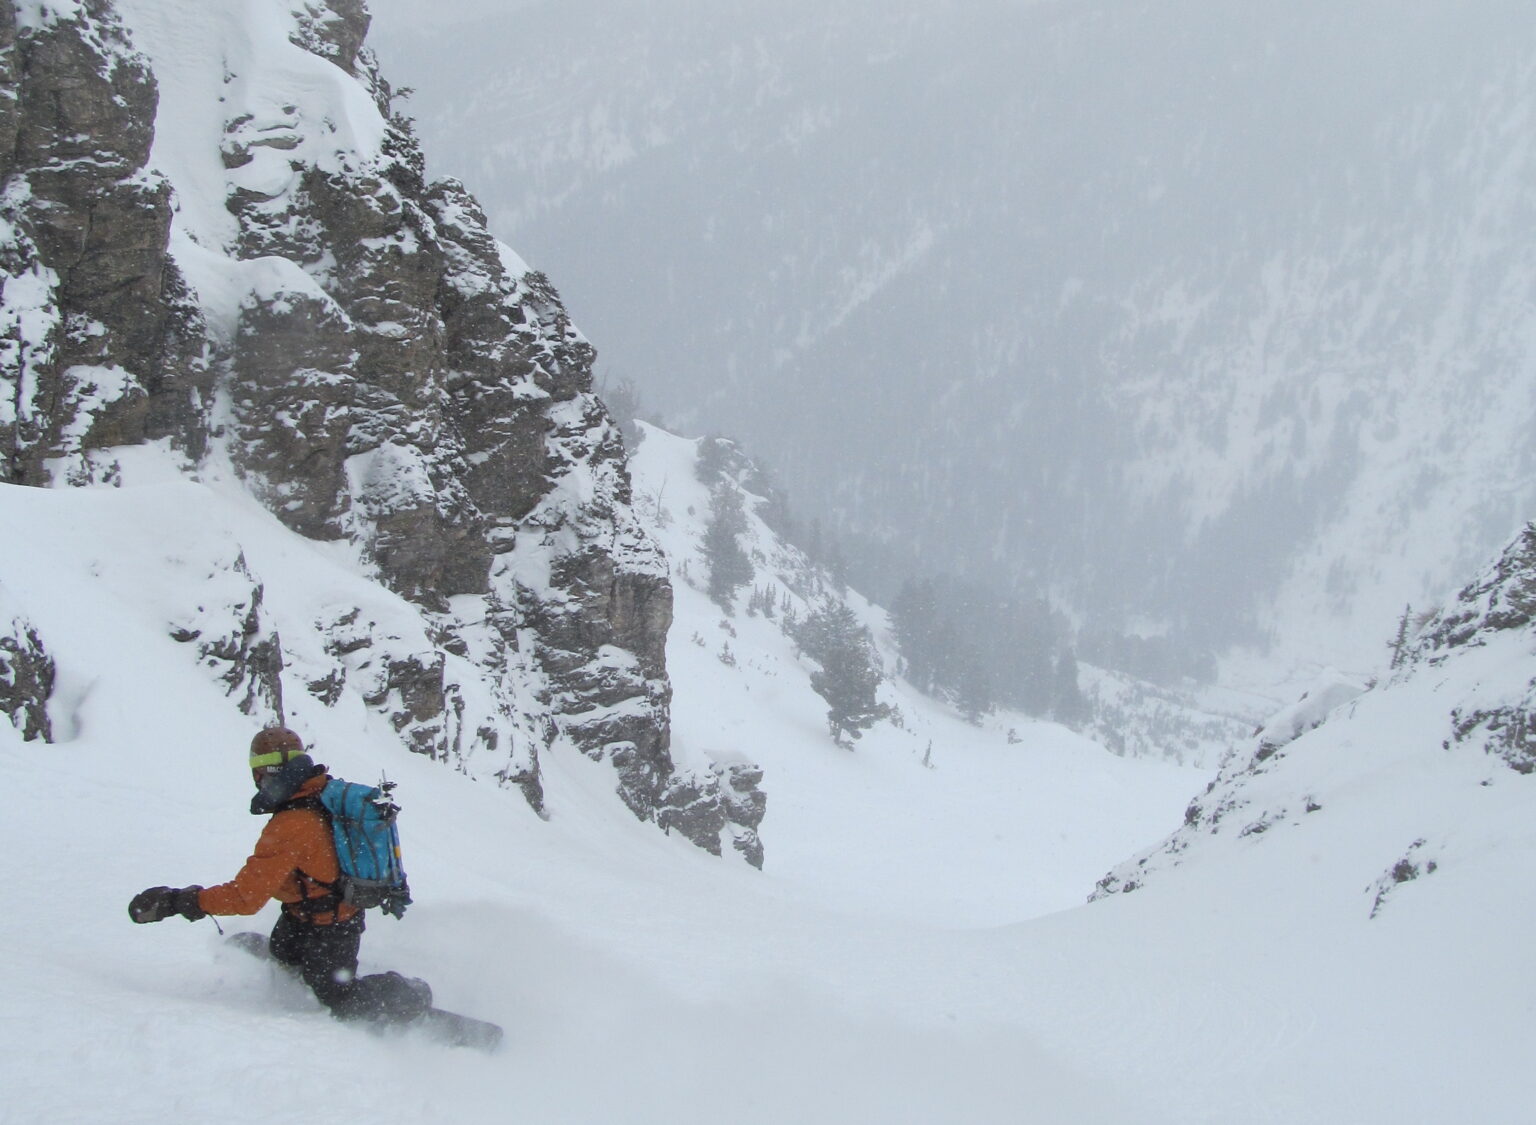 Snowboarding down the lower section of the East Chute on Kesler Peak